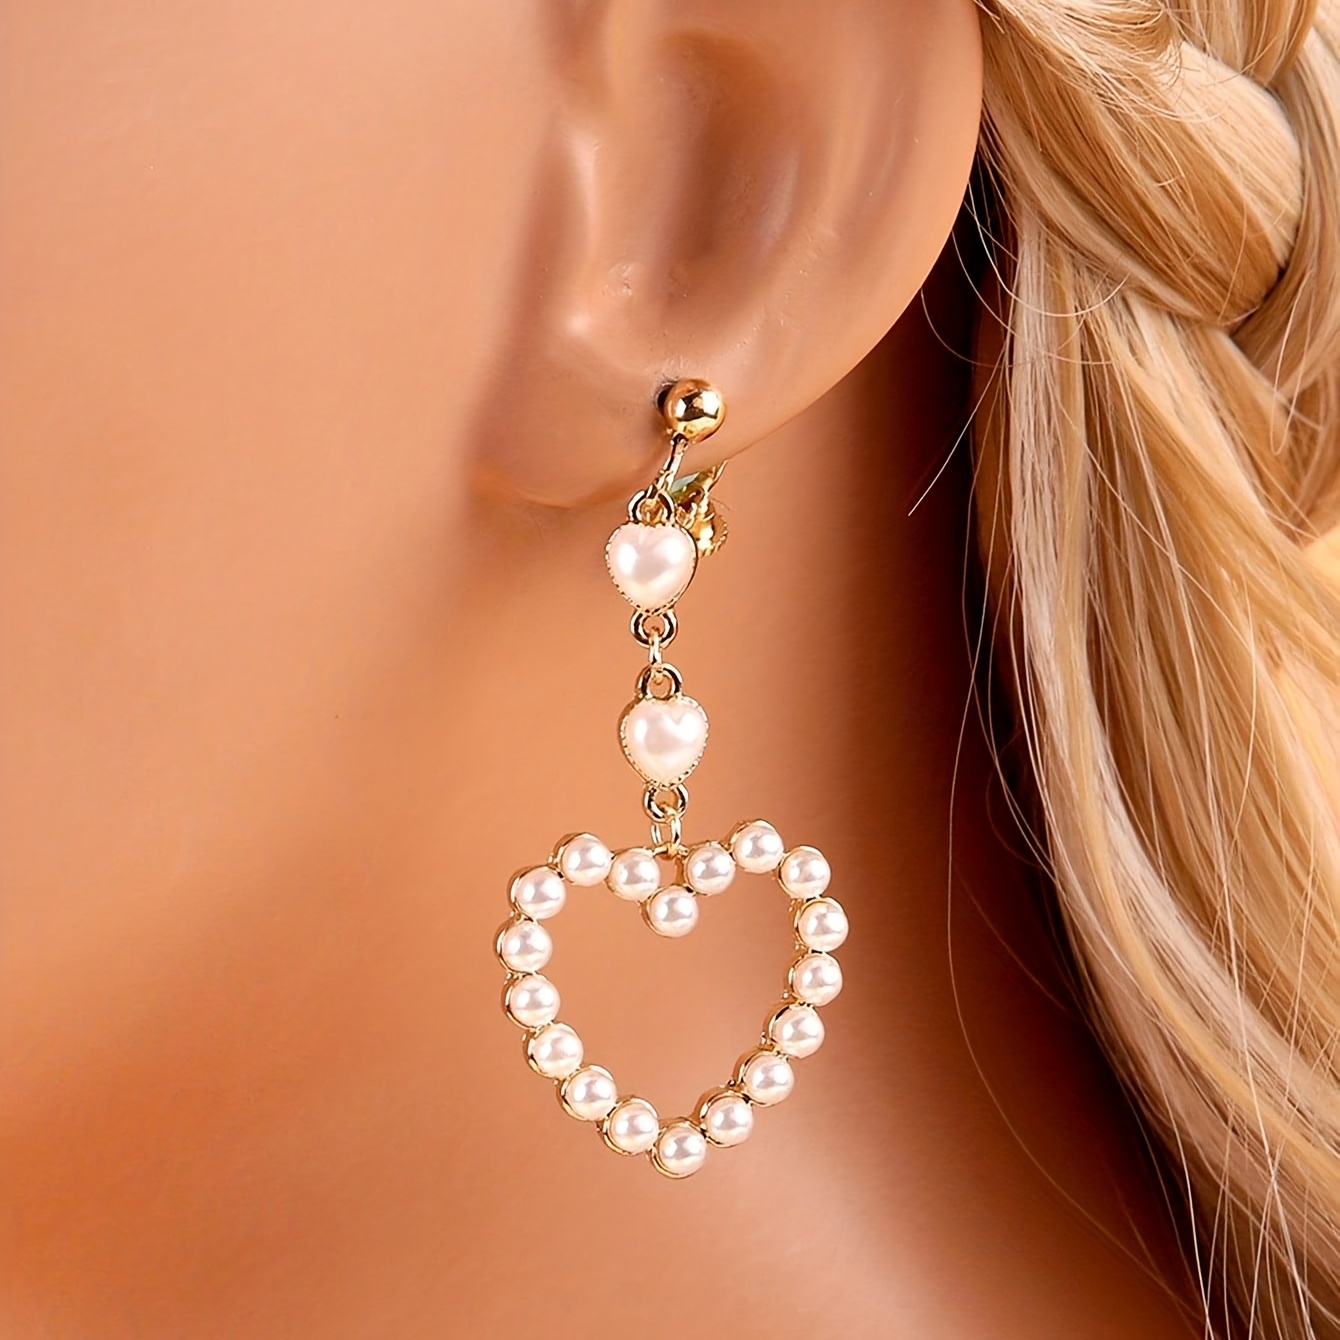 

Exquisite Hollow Imitation Pearl Design Clip On Earrings Zinc Alloy Jewelry Vintage Elegant Style For Women Valentine's Day Gift